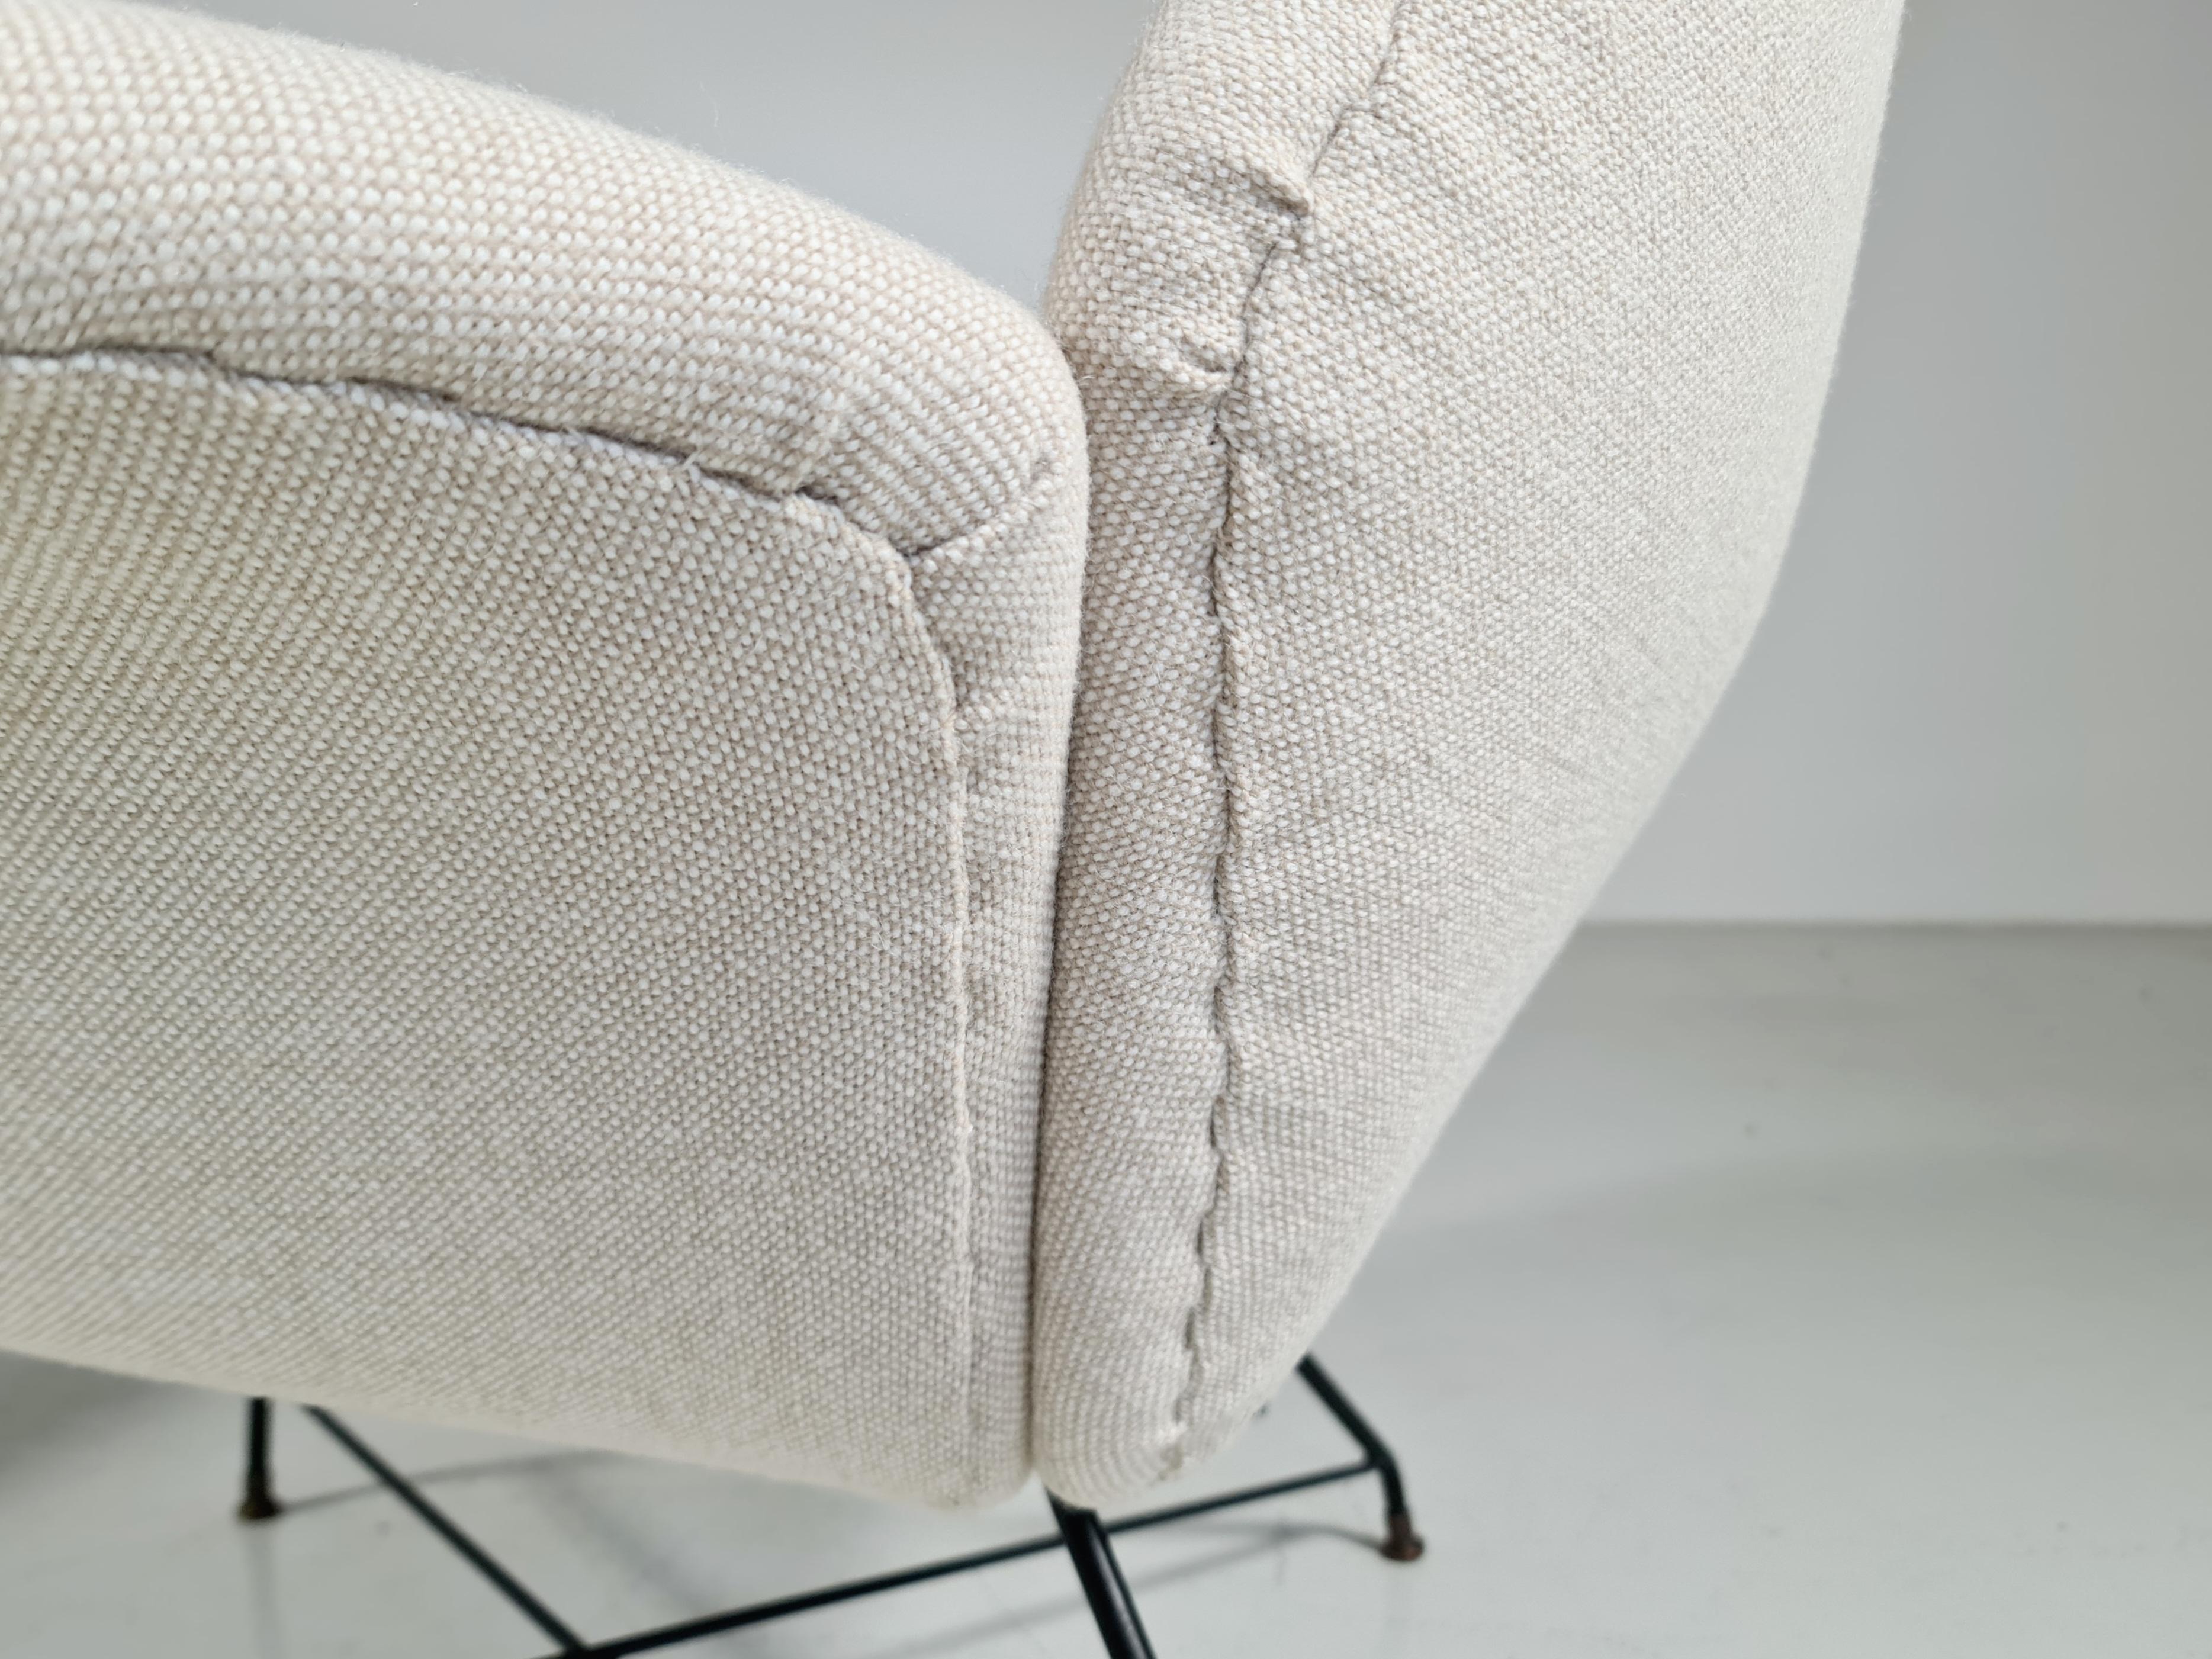 ‘Lotus’ Lounge Chairs in cream wool fabric by Augusto Bozzi for Saporiti, 1960s For Sale 3